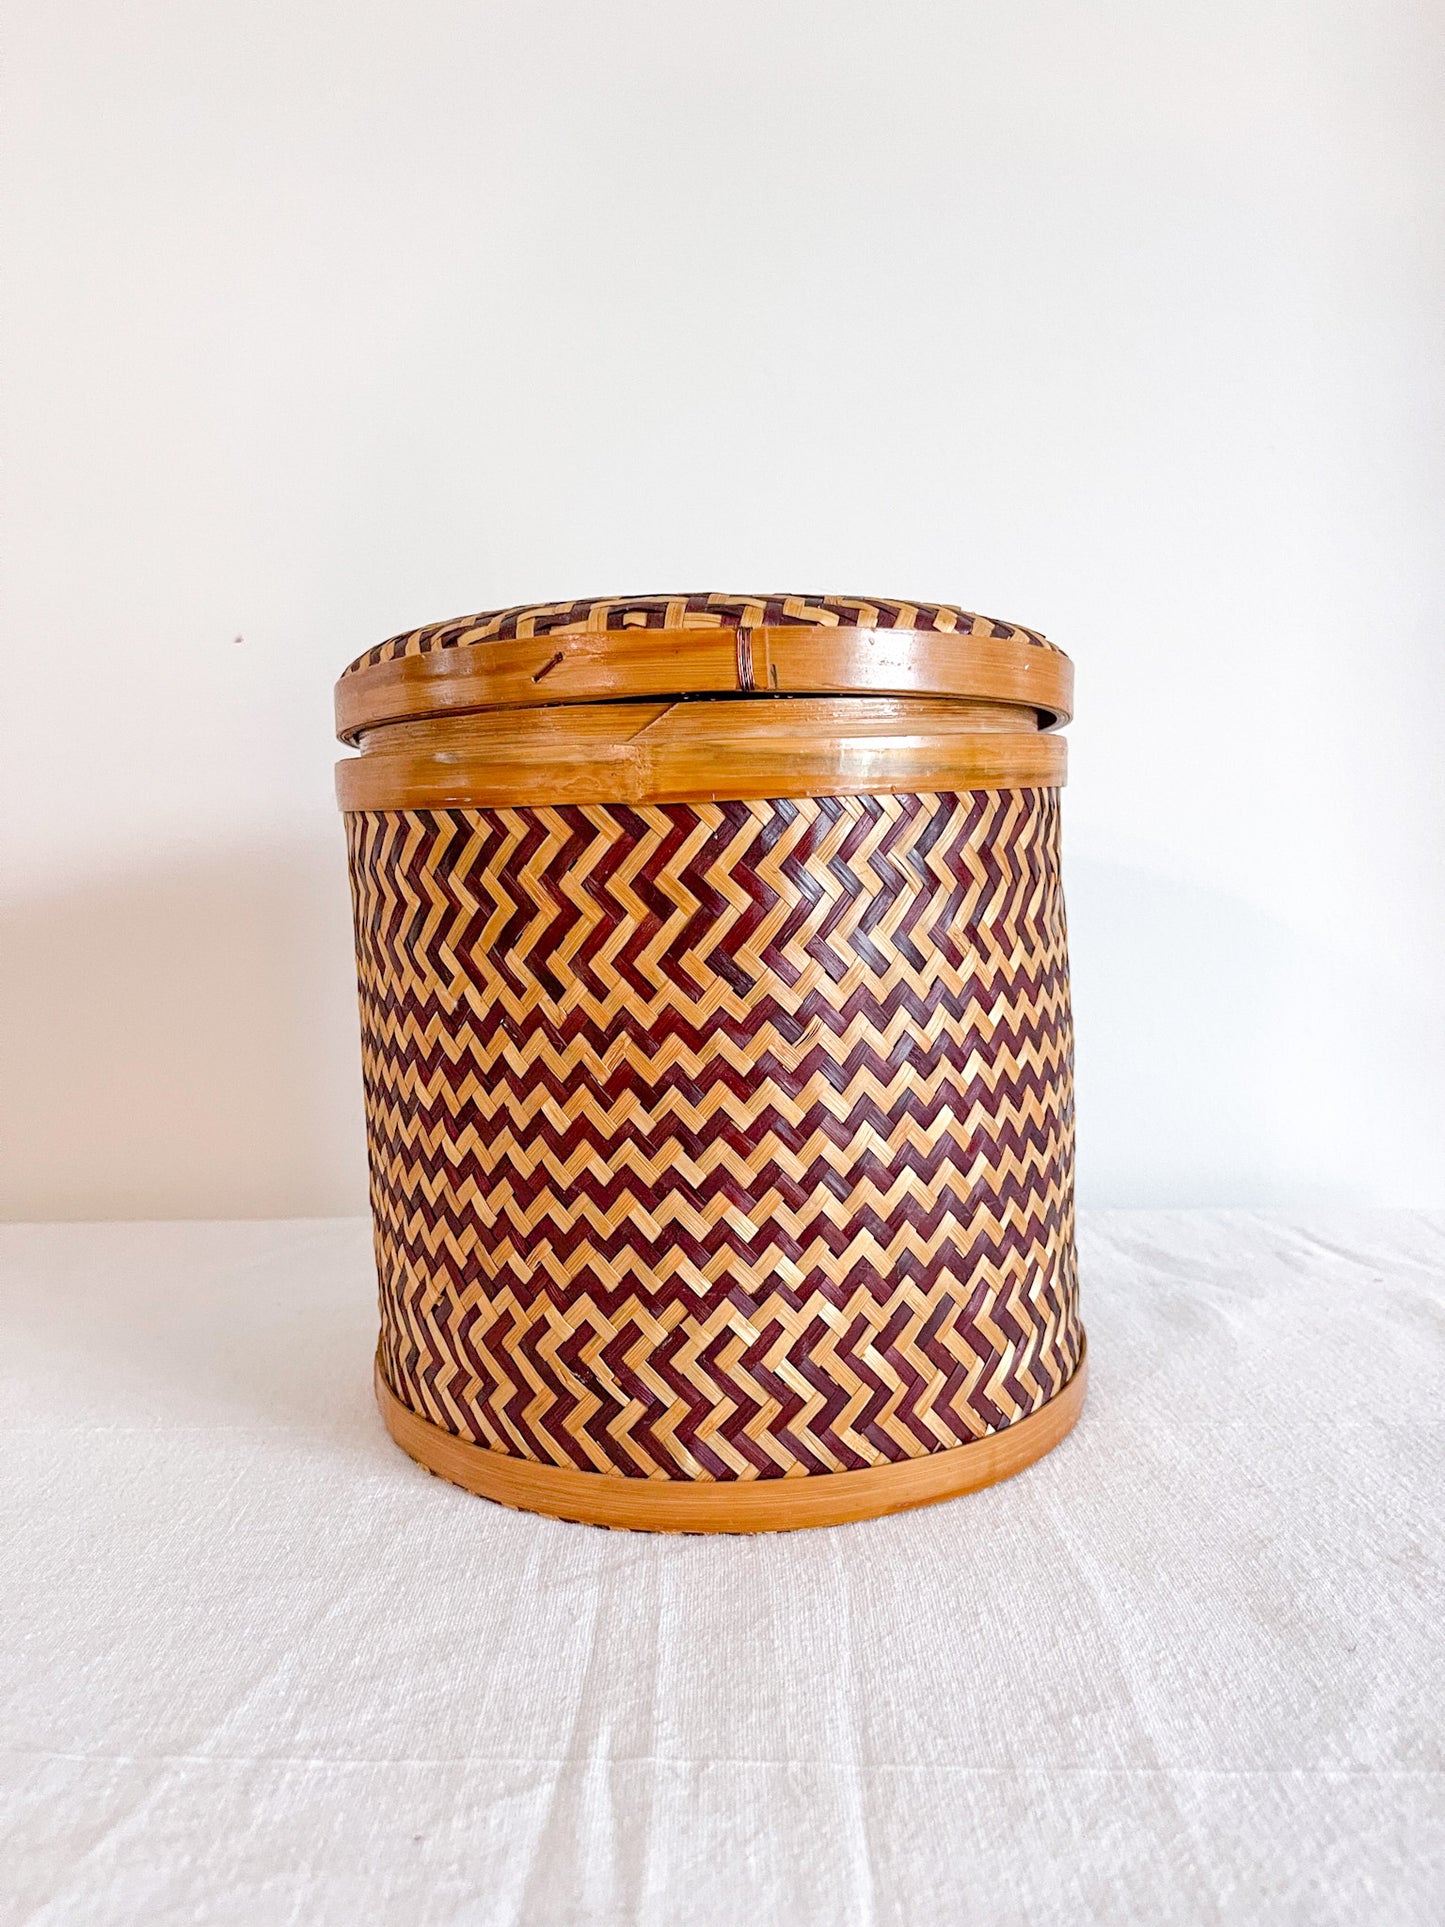 Bamboo Basket with matching lid.